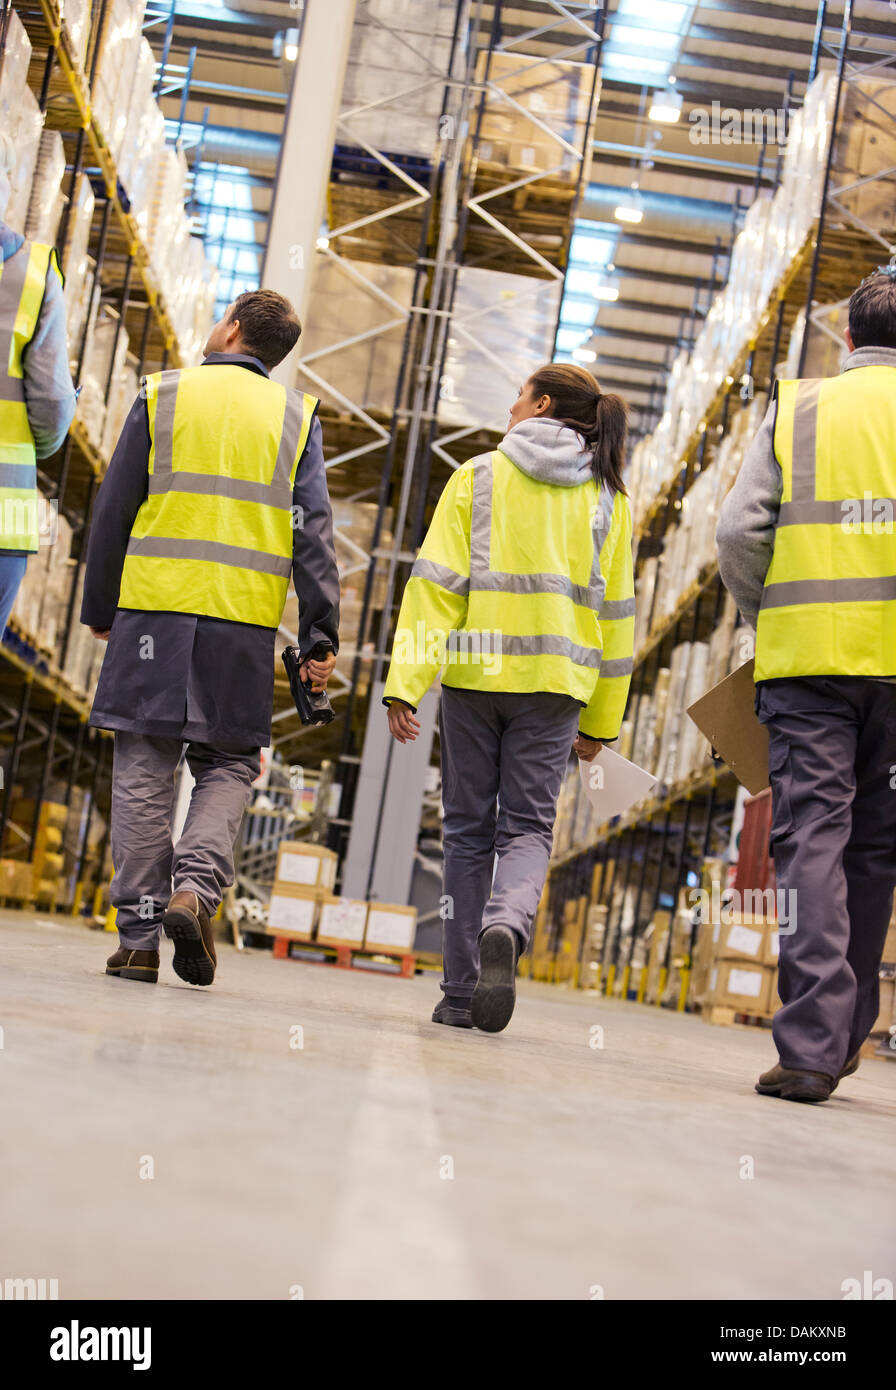 Workers walking in warehouse Stock Photo